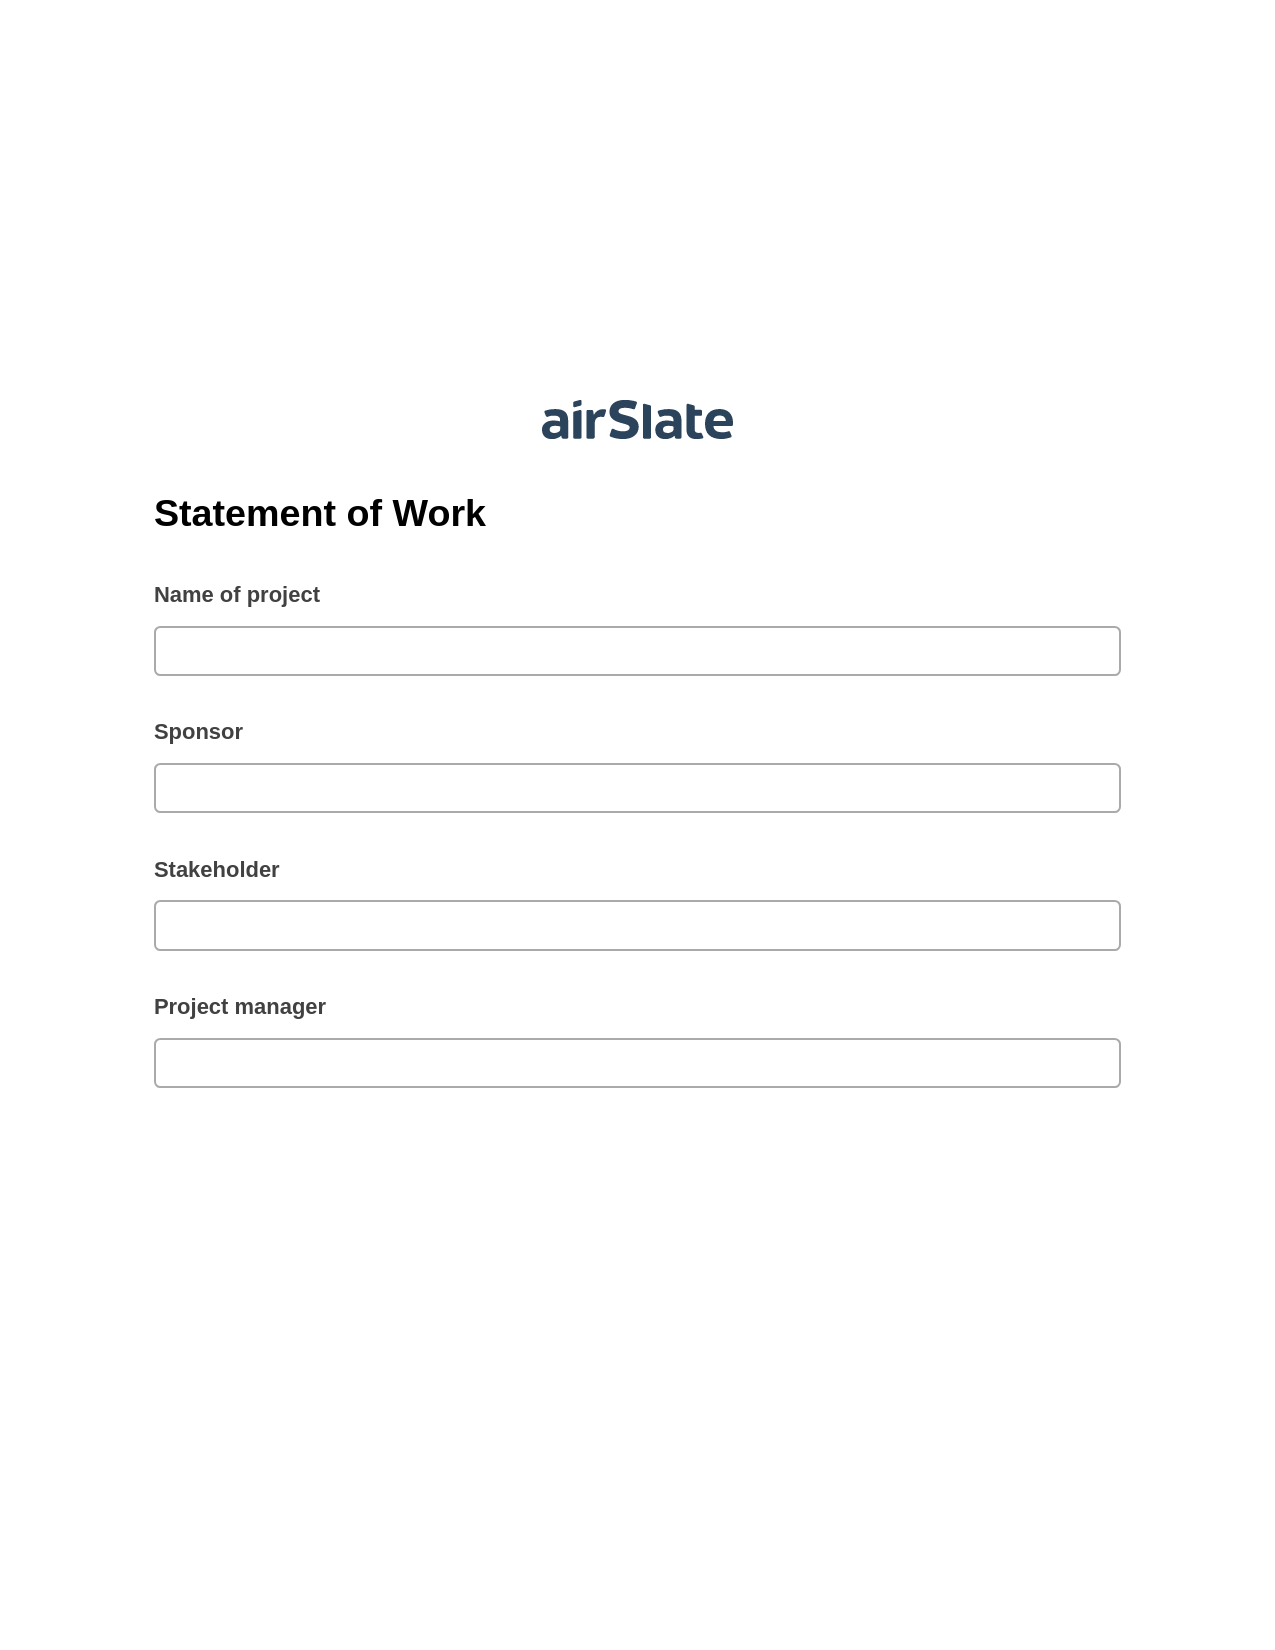 Statement of Work Pre-fill from Google Sheet Dropdown Options Bot, System Bot - Create a Slate in another Flow, Email Notification Postfinish Bot